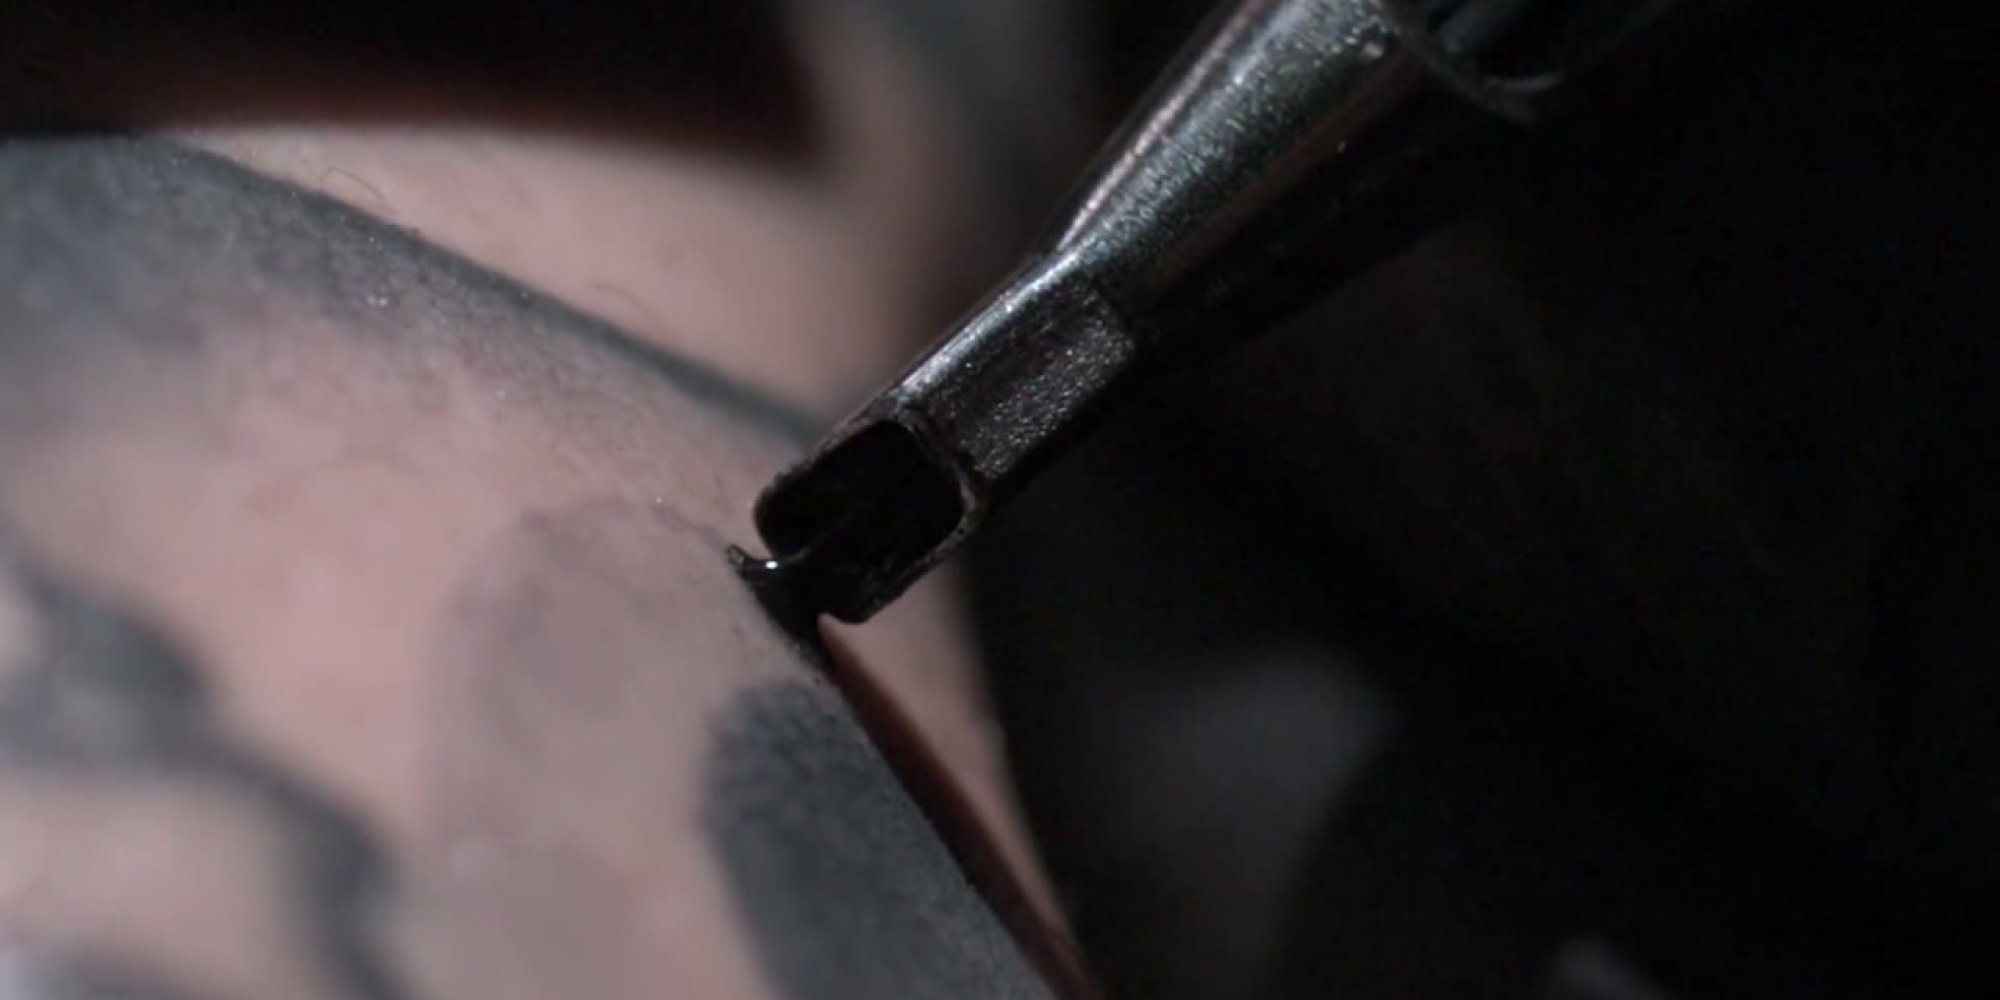 o-TATTOOING-CLOSE-UP-IN-SLOW-MOTION-facebook.jpg